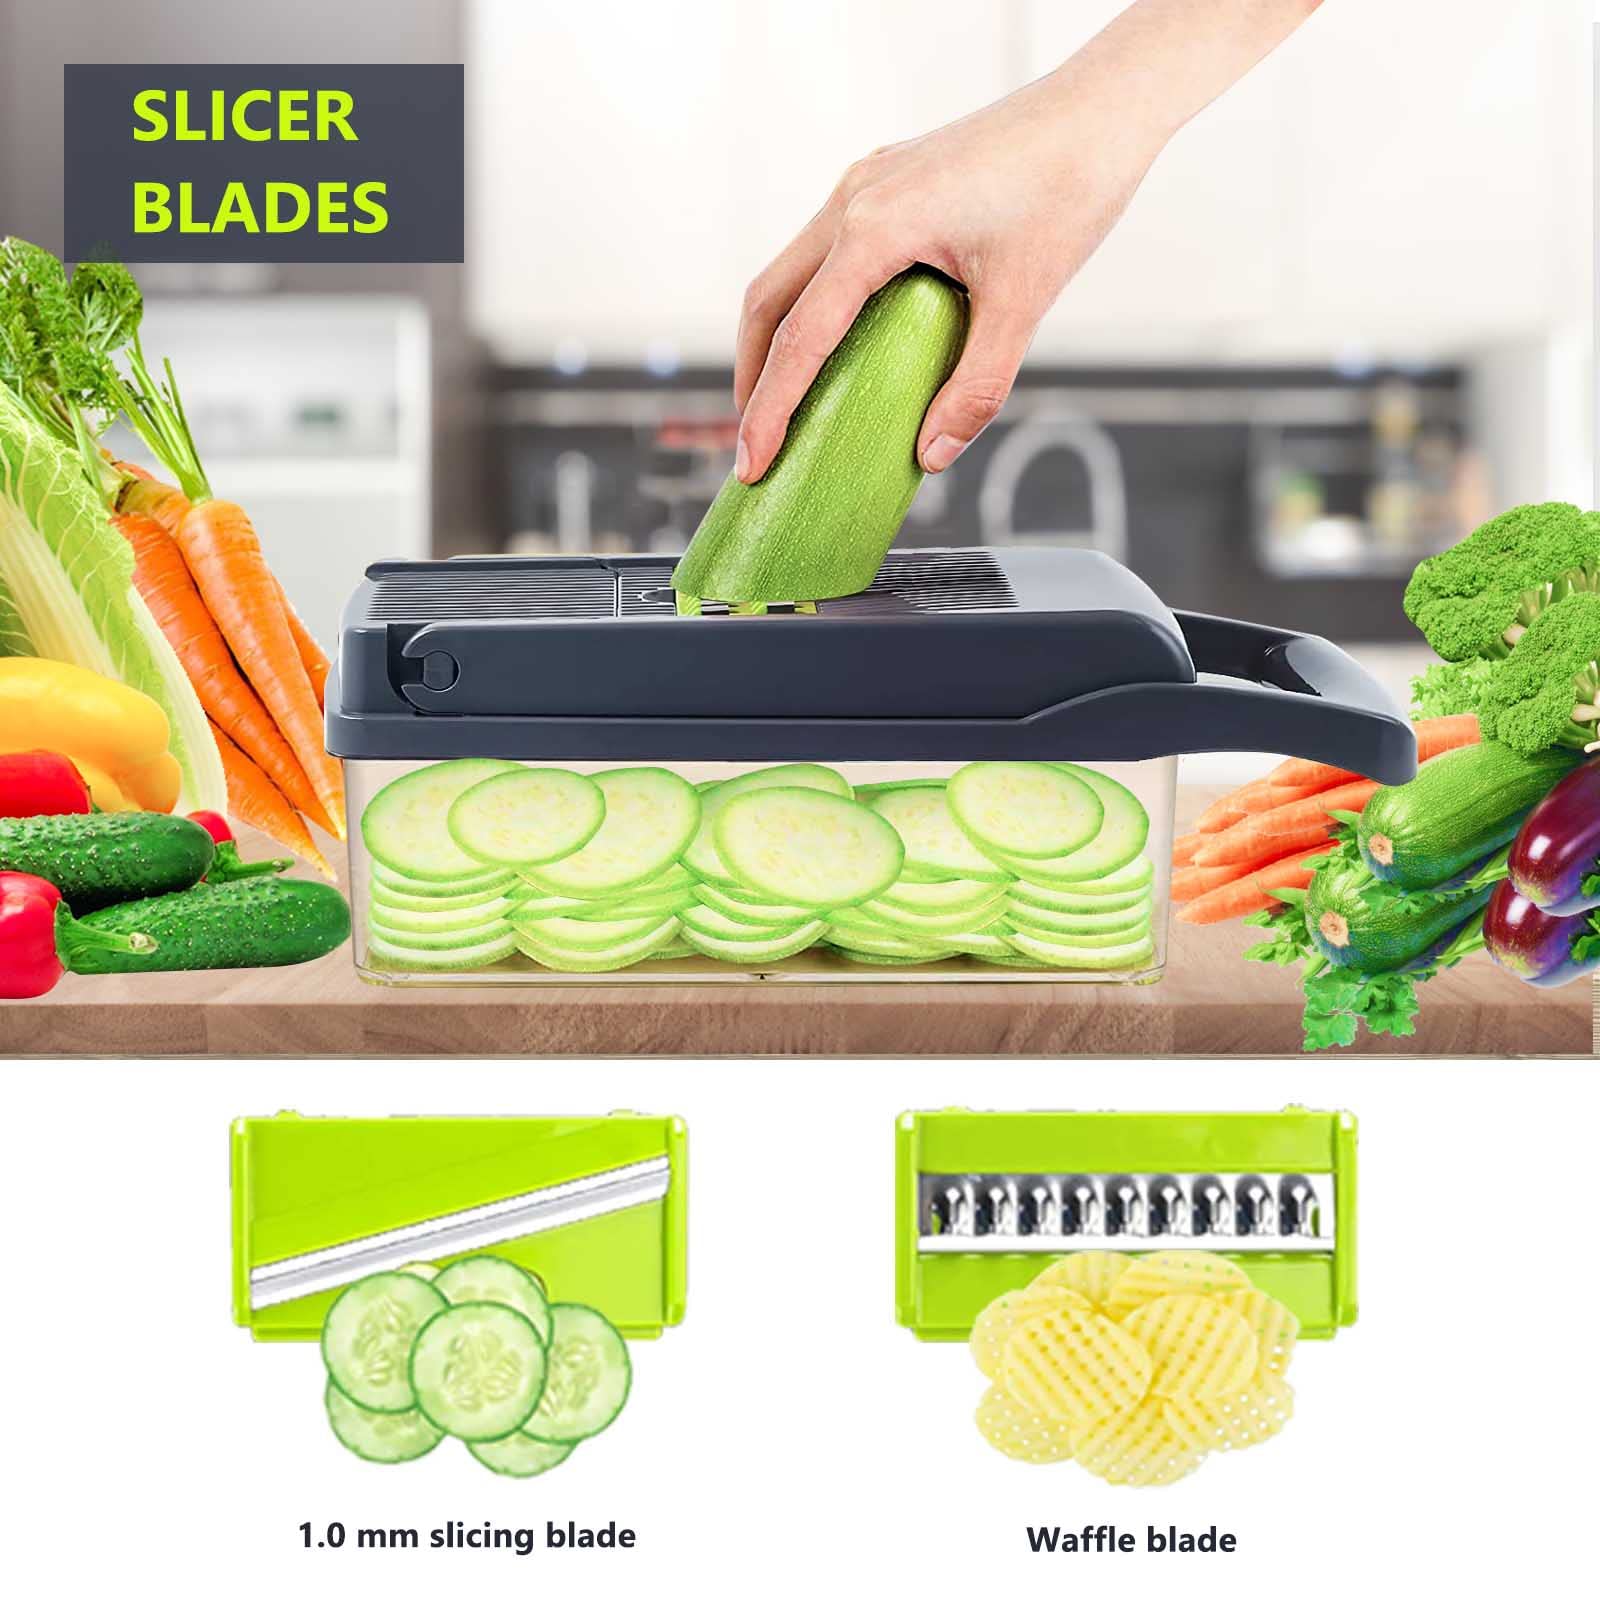 YAYAYOUNG Vegetable Chopper,Multifunctional 16 in 1 Food Chopper,Veggie Chopper with Container,Pro Onion Chopper,Potato Slicer,Kitchen Cutter Slicer Dice(Grey)